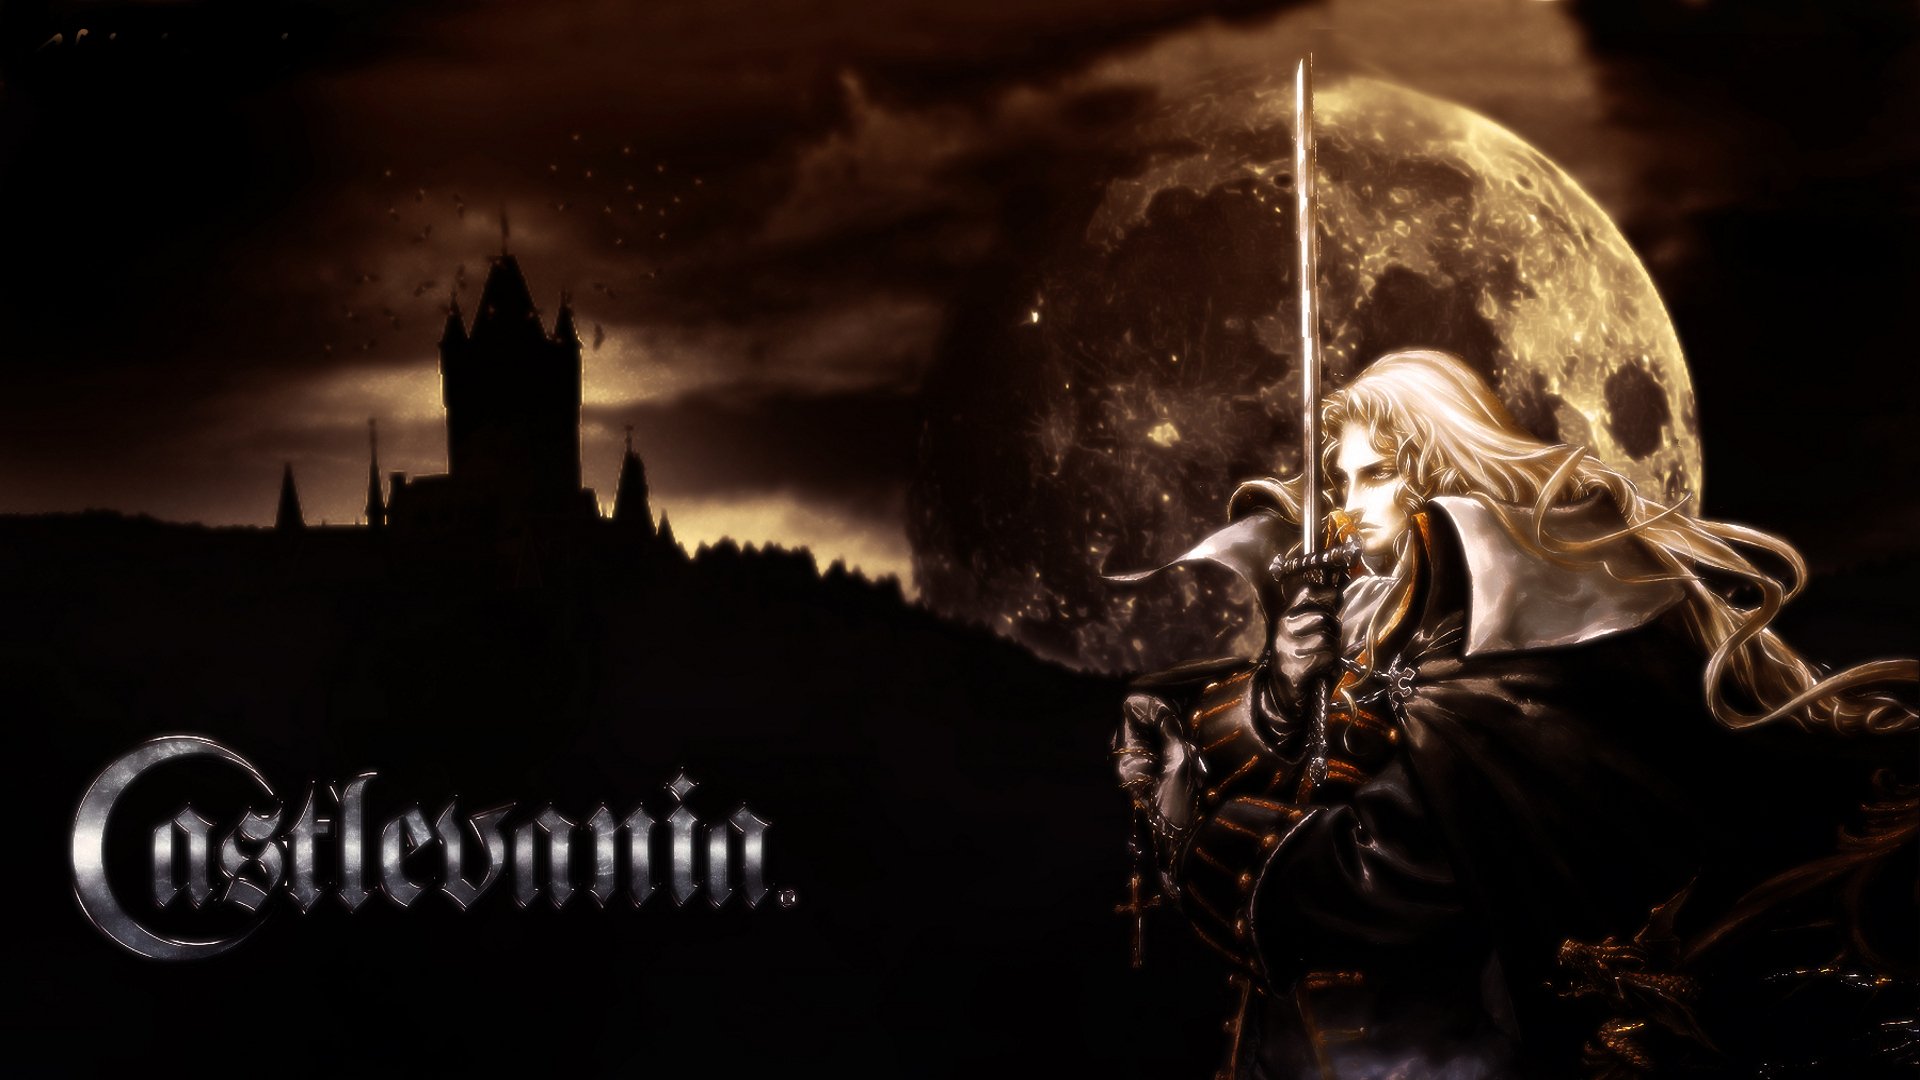 Castlevania: Symphony of the Night HD Wallpaper | Background Image